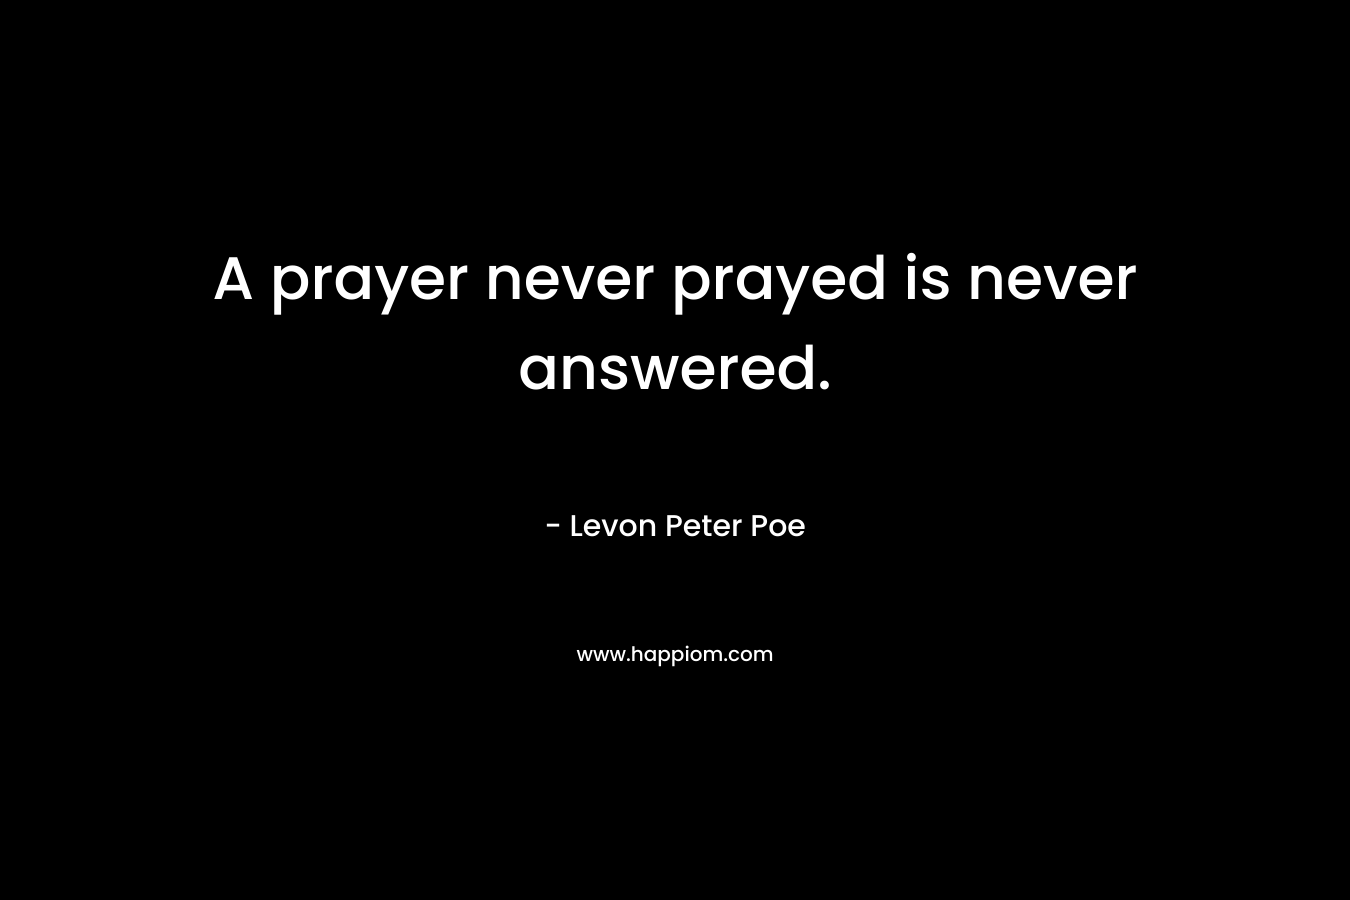 A prayer never prayed is never answered. – Levon Peter Poe